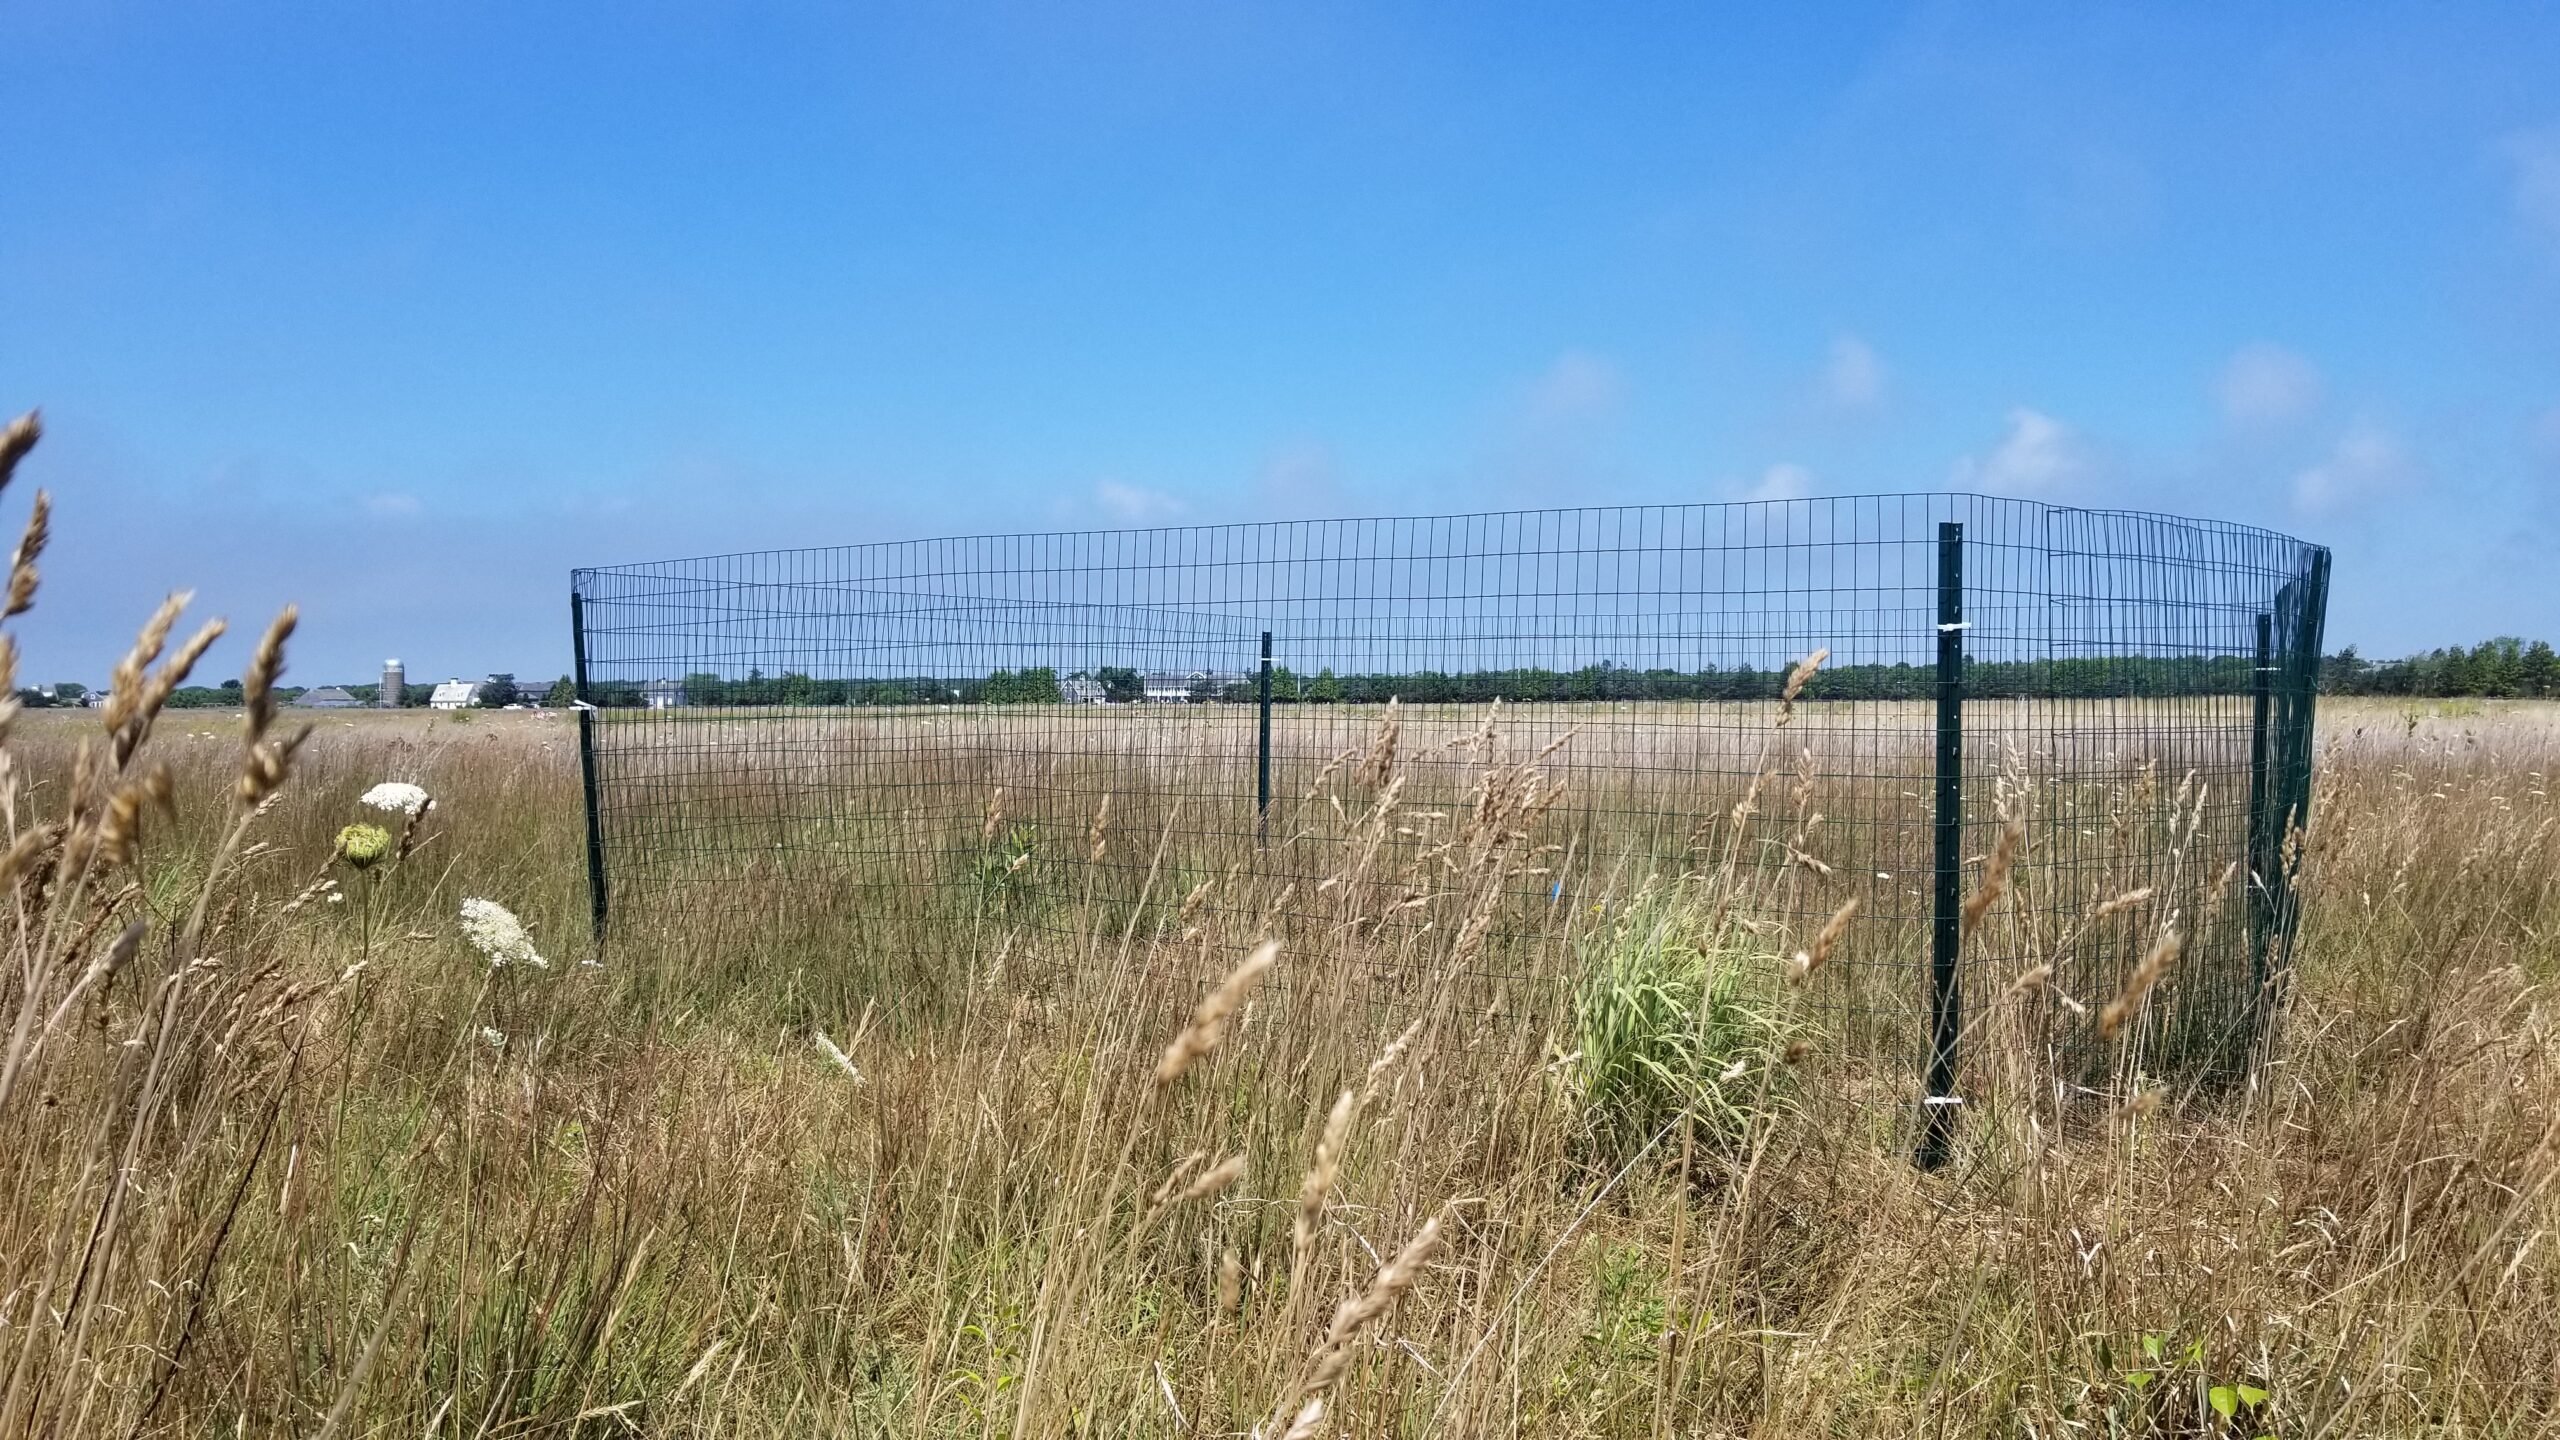 An metal, four post, fenced exclosure stands in an open field, gaurding the Liatris novae-angliae seedlings within.